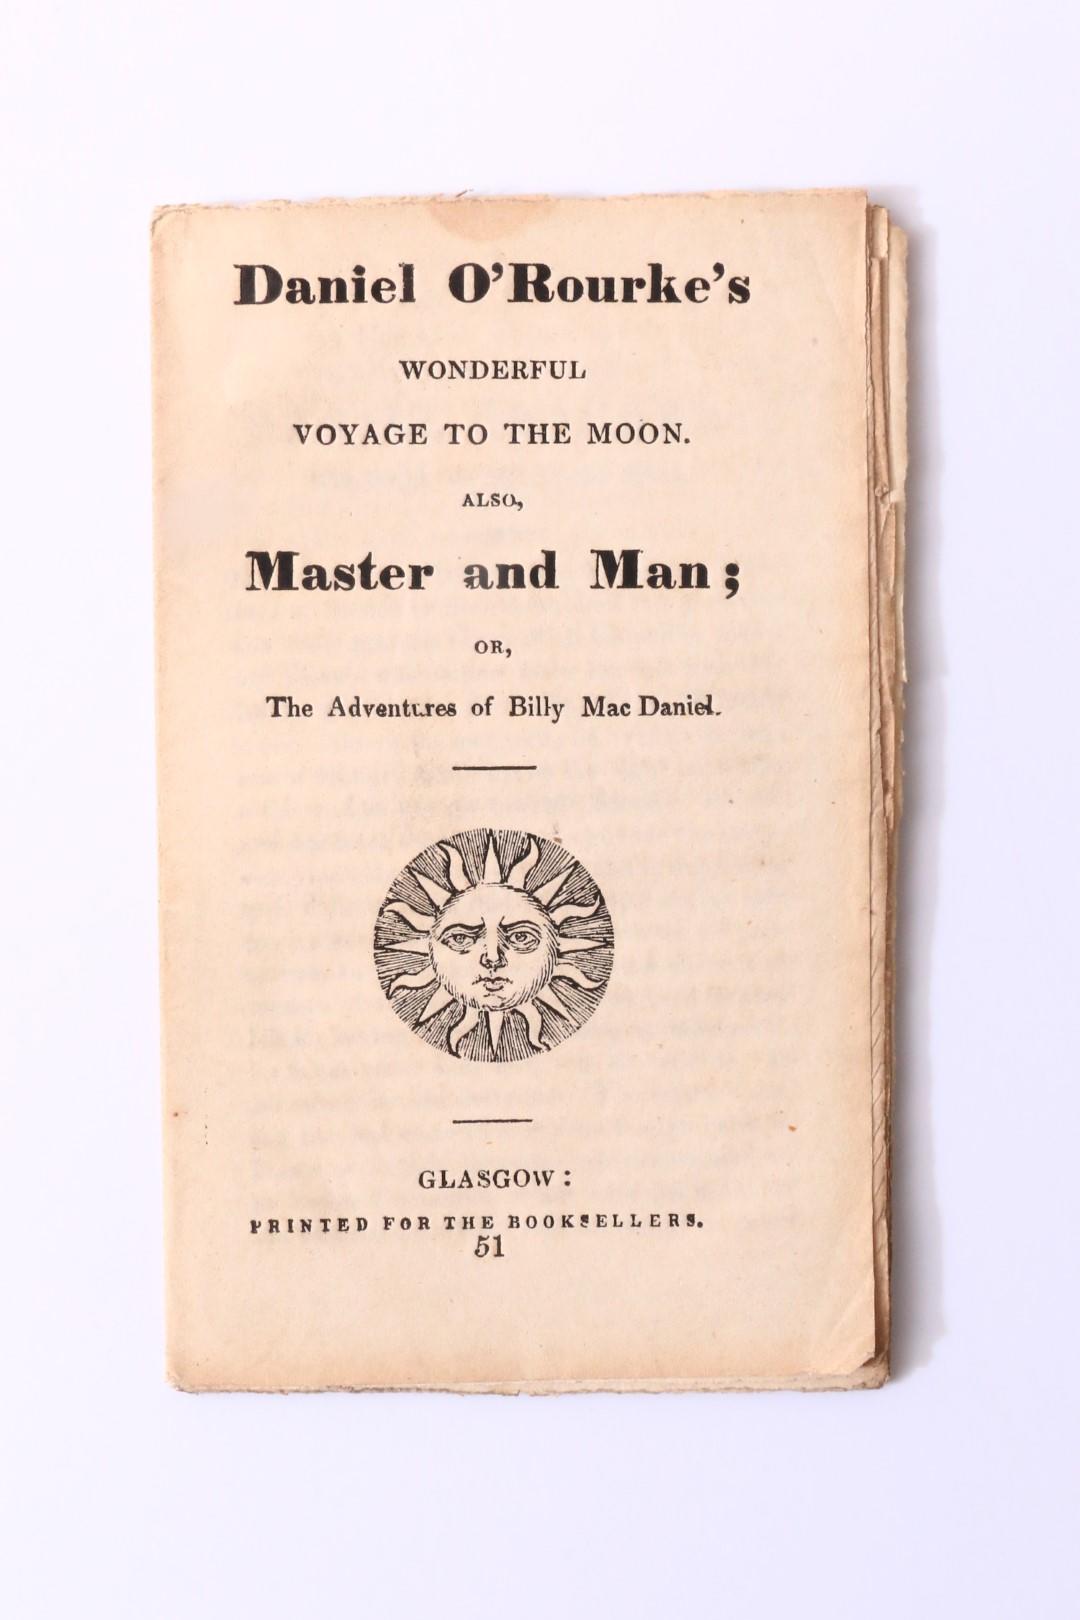 Anonymous [William Maginn] - Daniel O'Rourke's Wonderful Voyage to the Moon. Also, Master and Man; or, The Adventures of Billy MacDaniel - No Publisher, n.d. [c1840], First Edition.